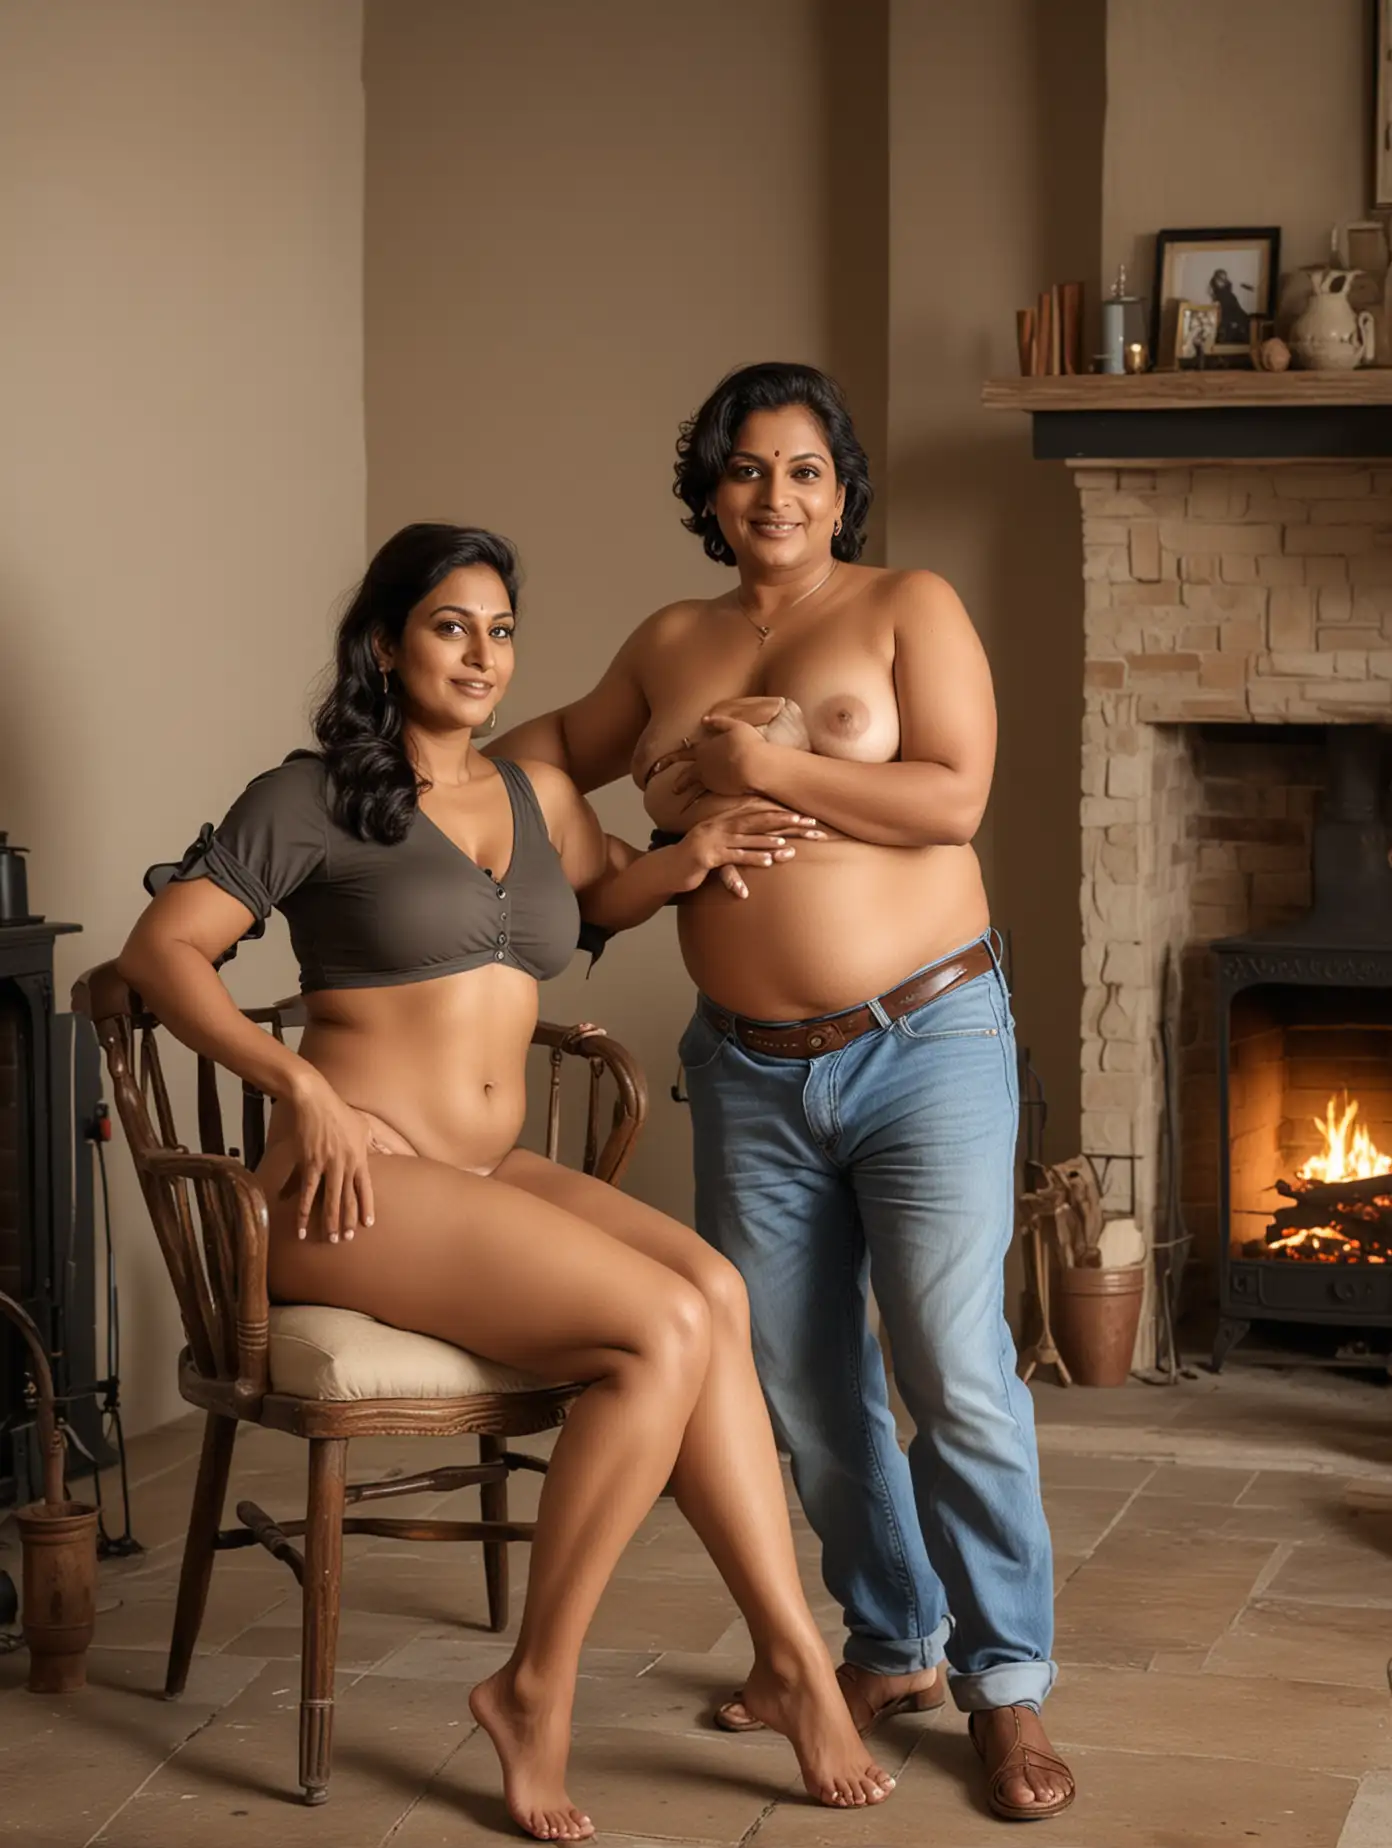 Curvy-Indian-Woman-Nude-Photoshoot-by-Fireplace-with-Male-Photographer